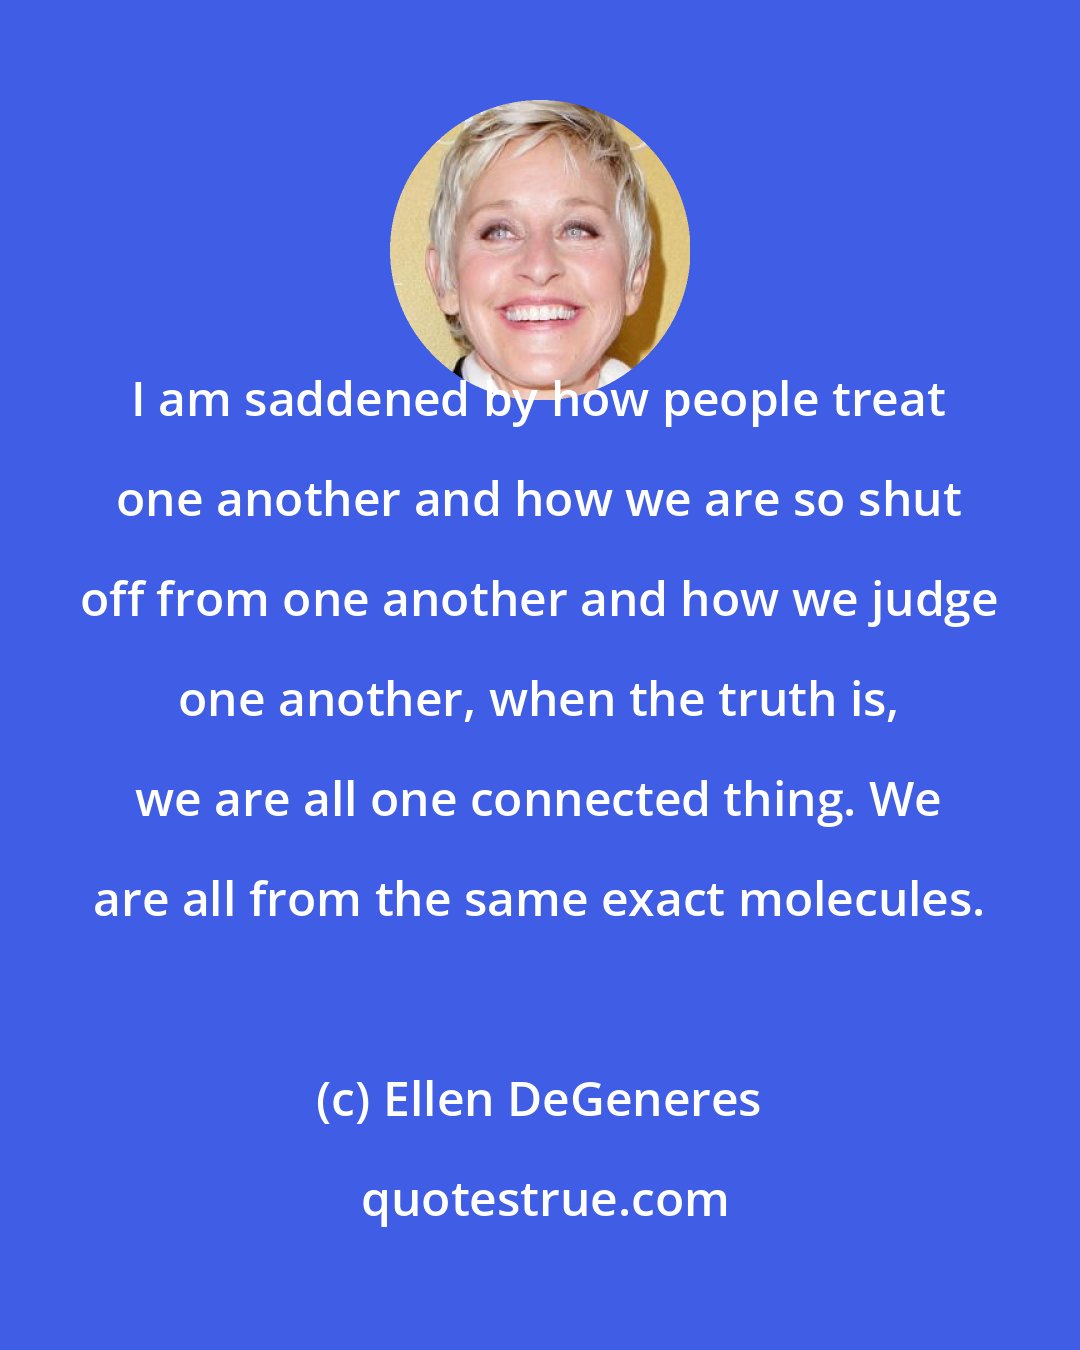 Ellen DeGeneres: I am saddened by how people treat one another and how we are so shut off from one another and how we judge one another, when the truth is, we are all one connected thing. We are all from the same exact molecules.